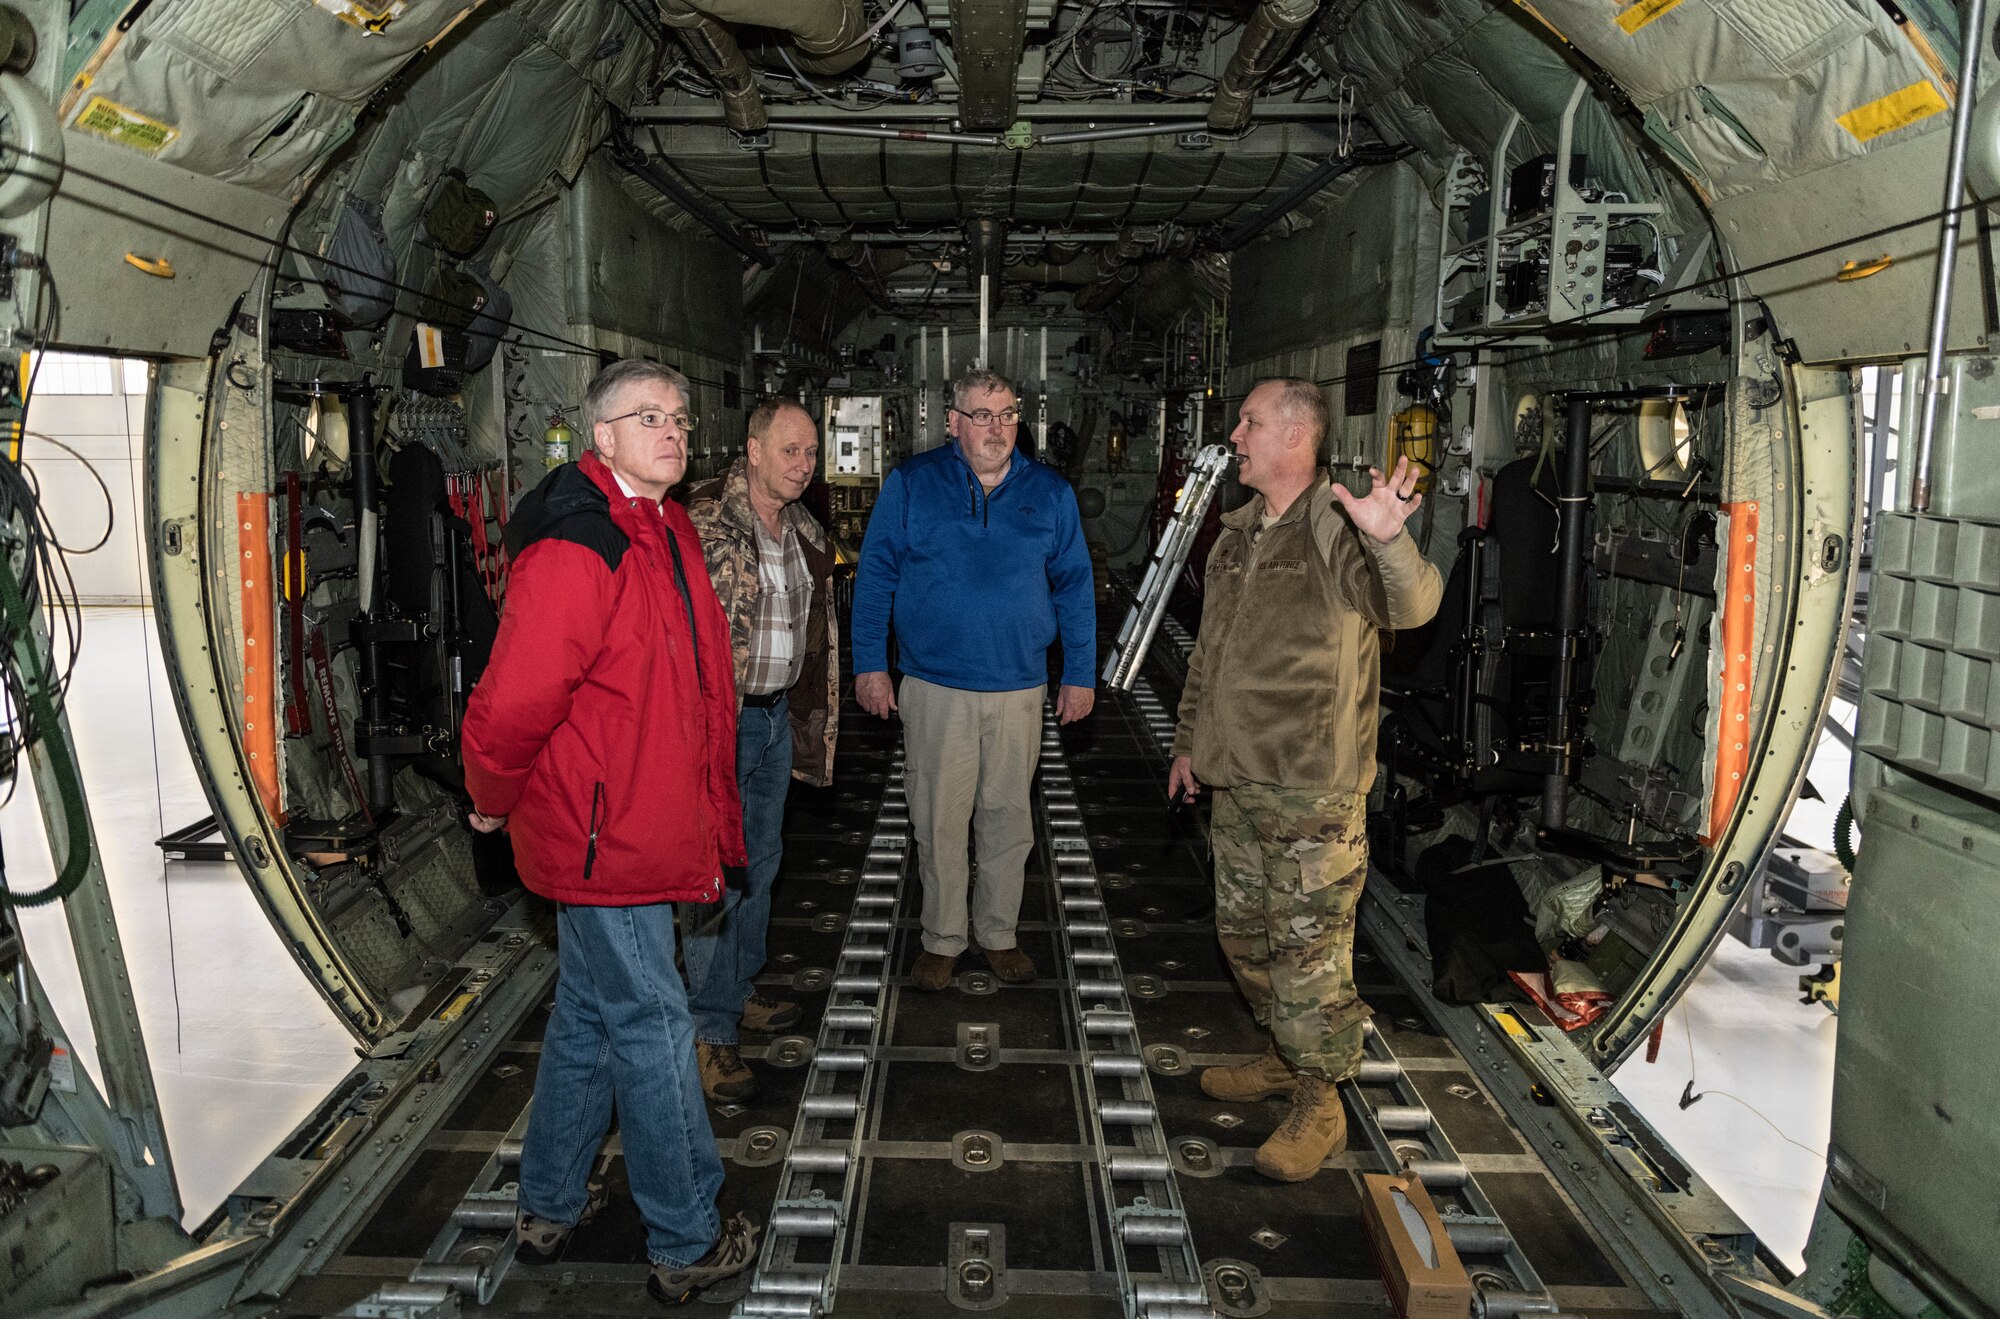 Members of the Youngstown Air Reserve Base Community Council executive board toured Youngstown Air Reserve Station, getting an insider's perspective on the training in which Reserve Citizen Airmen participate during Unit Training Assemblies here, March 10, 2019.